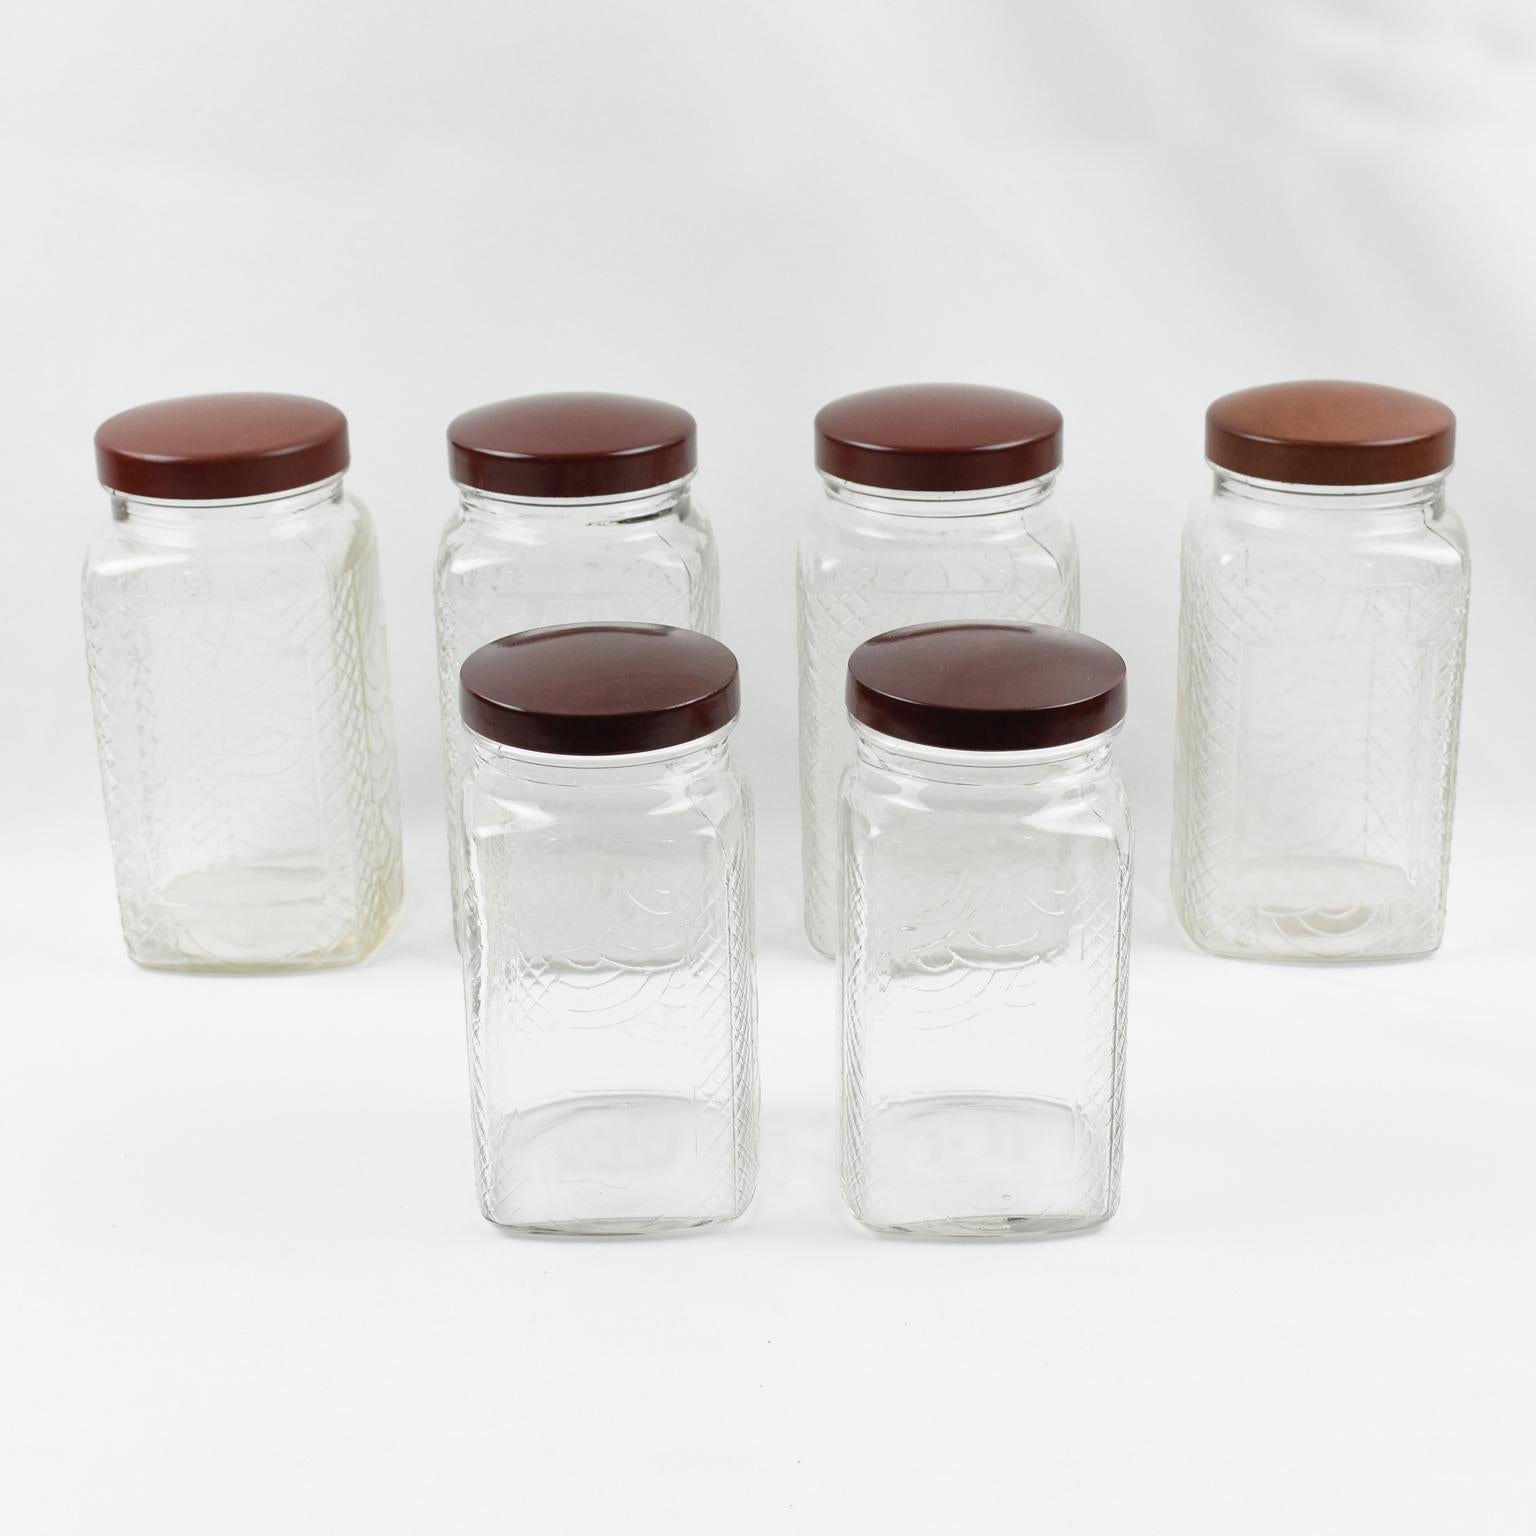 These stunning French Art Deco kitchen canister jars, six pieces in assorted sizes, were crafted in the 1930s. Two sizes are available in this set: large and medium. The containers have a geometric square shape. The molded glass has a typical Art